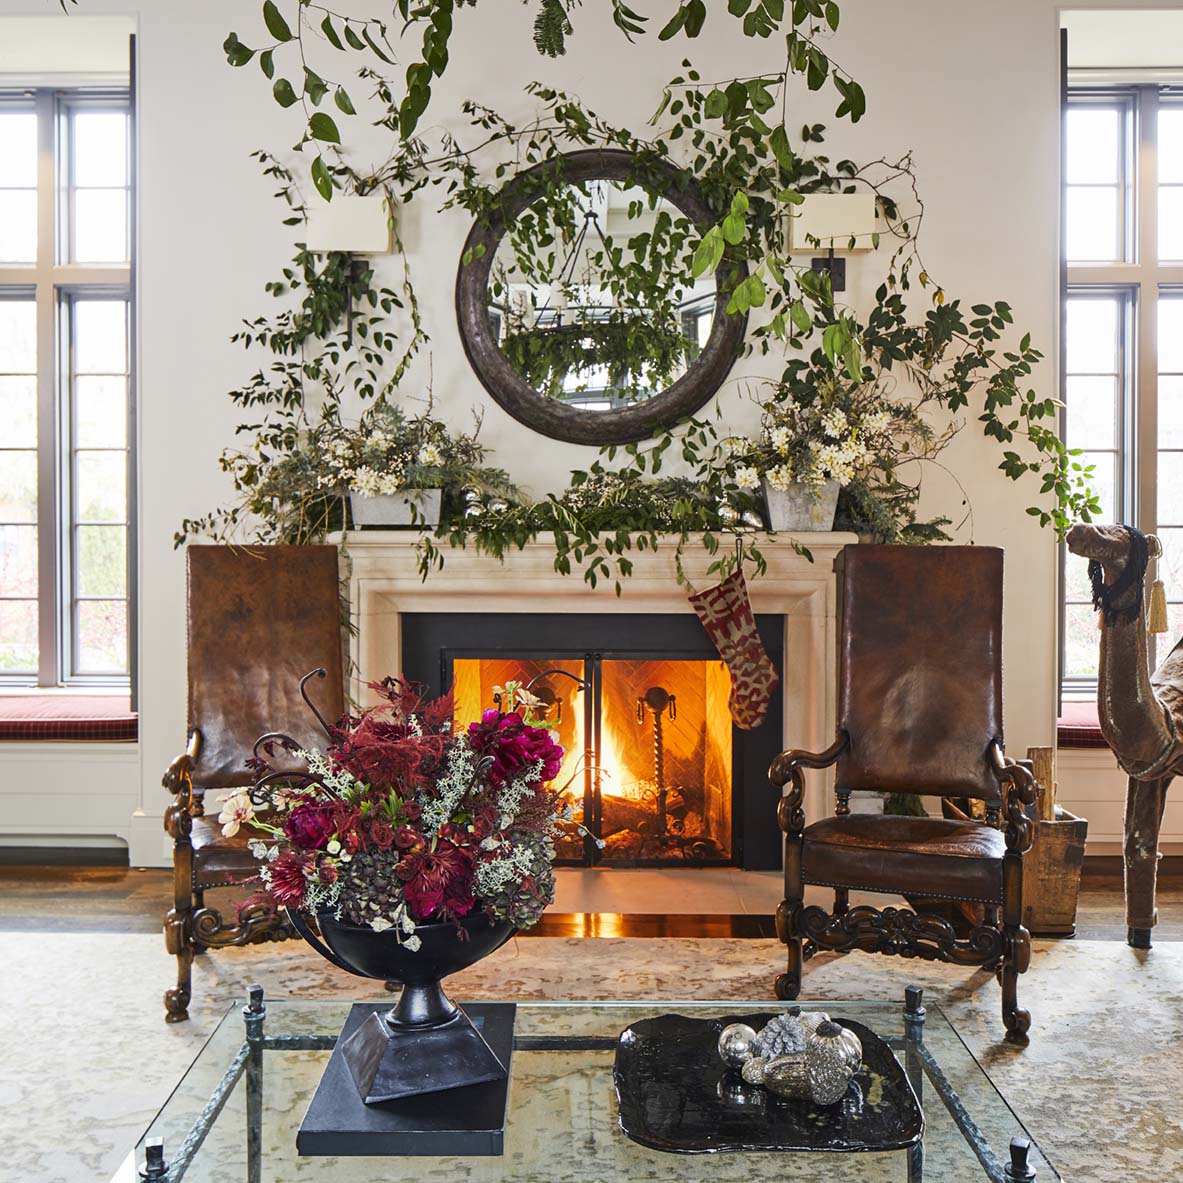 Two antique carved wood chairs upholstered in leather flank a fireplace decorated with greenery arrangement as if it were growing naturally on the mantel and wall.